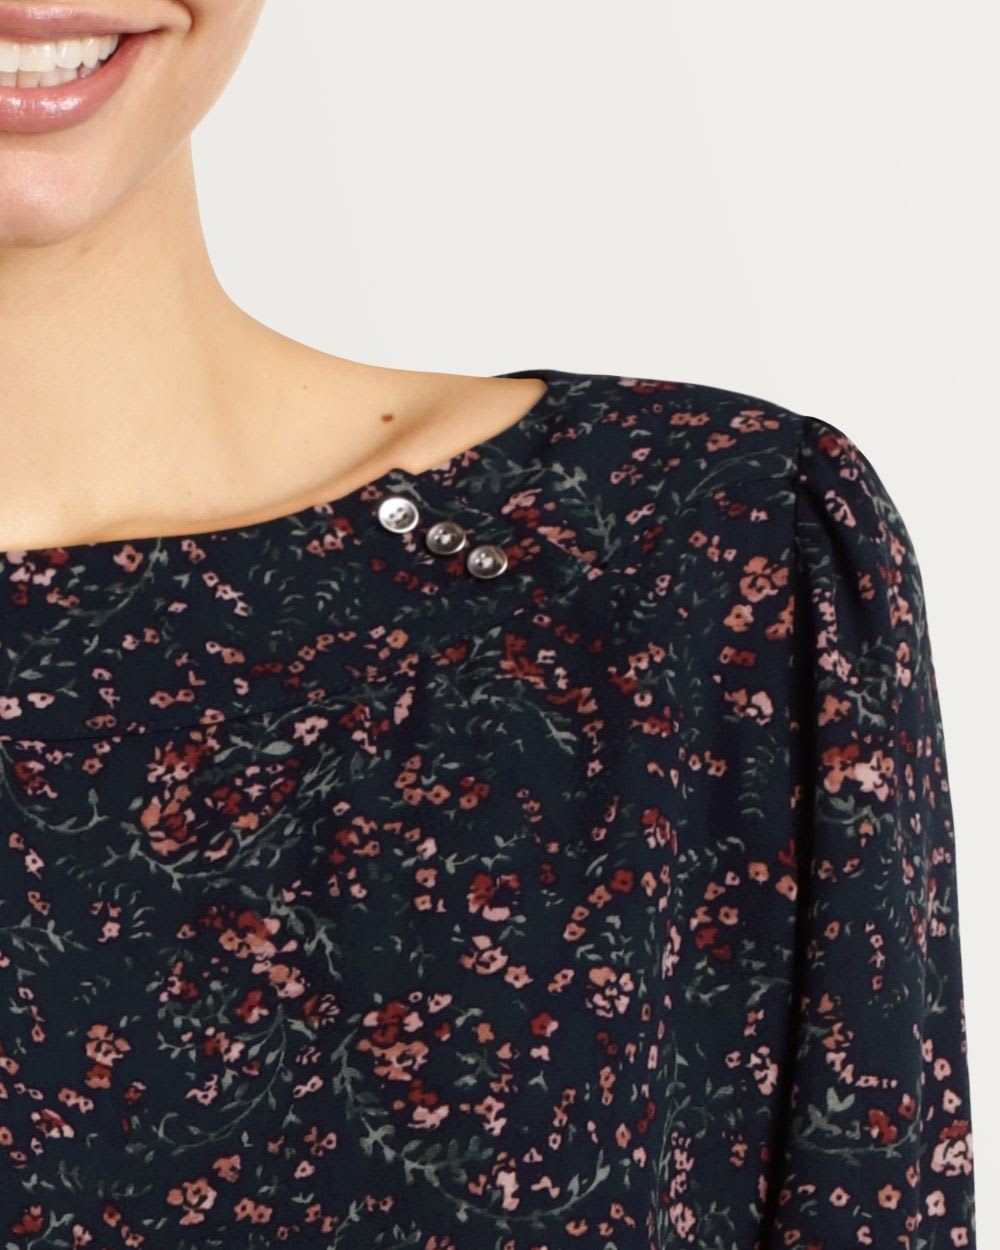 Printed ¾ Sleeve Boat Neck Blouse